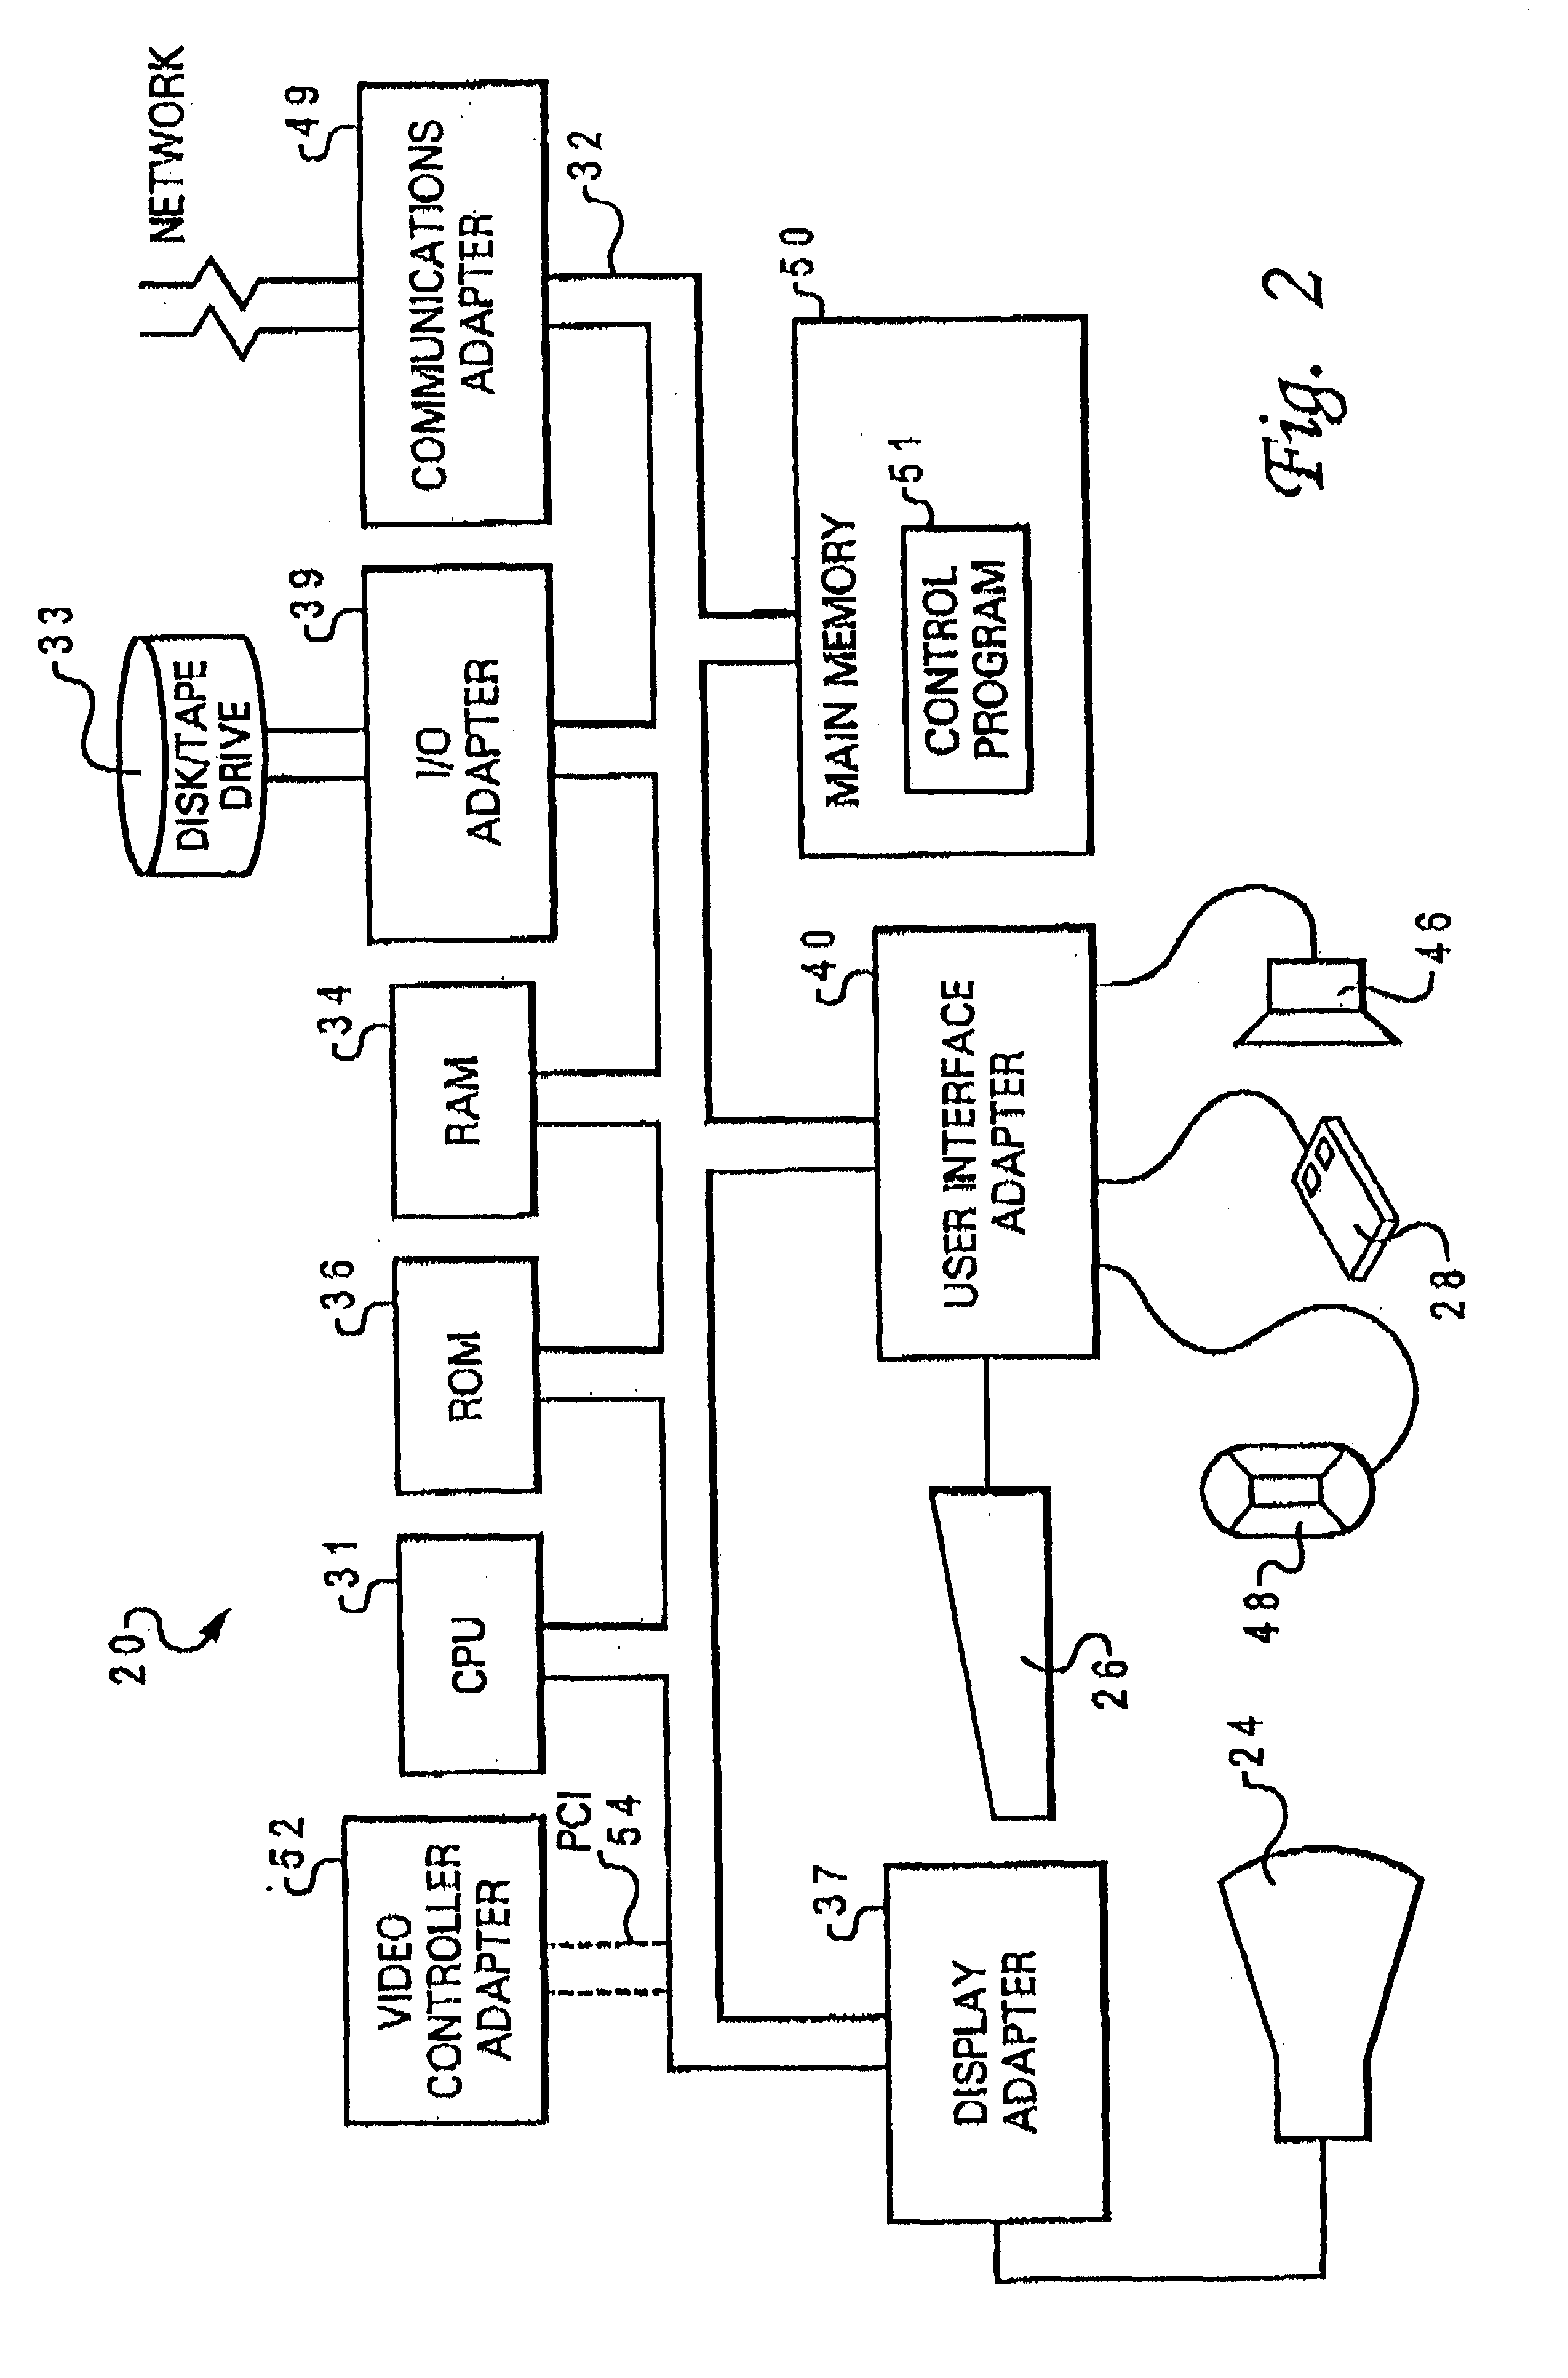 Method and system for dynamically selecting video controllers present within a computer system